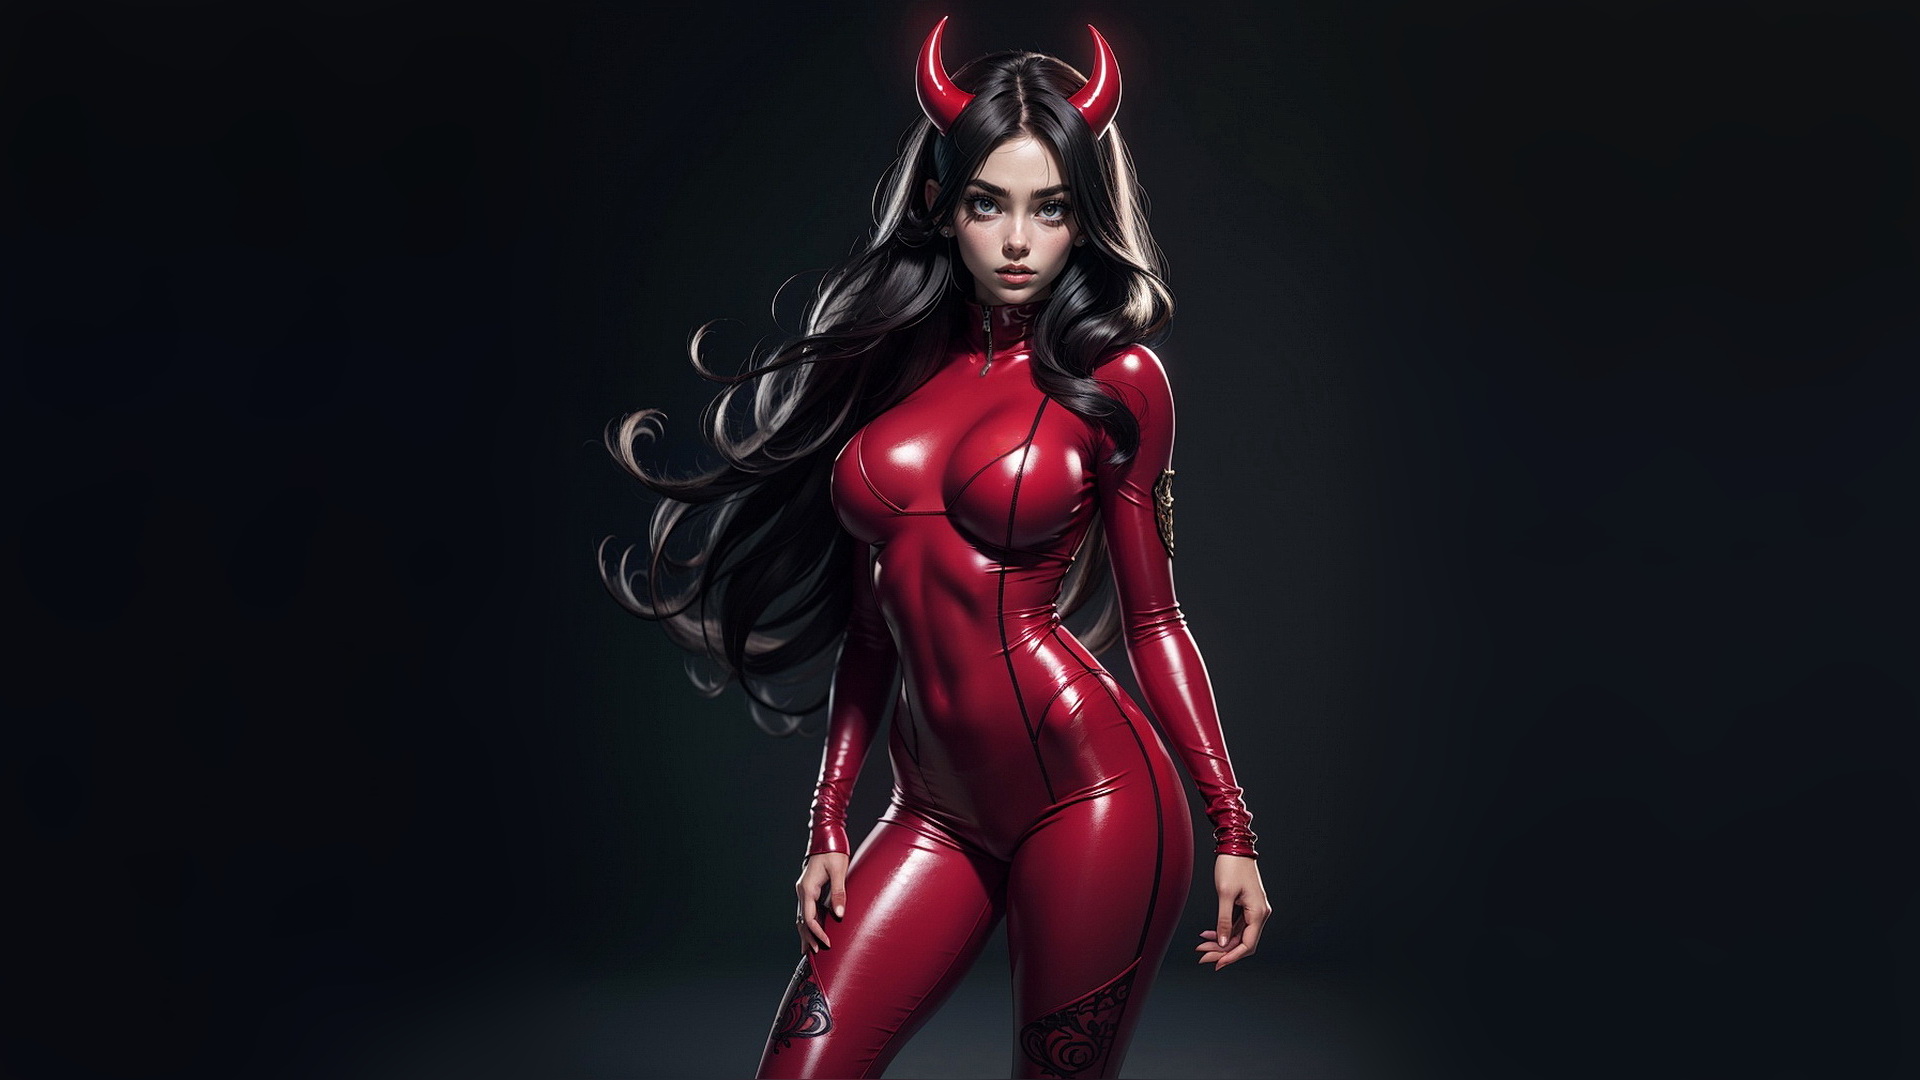 Free photo Demon girl with black hair and red suit on dark background